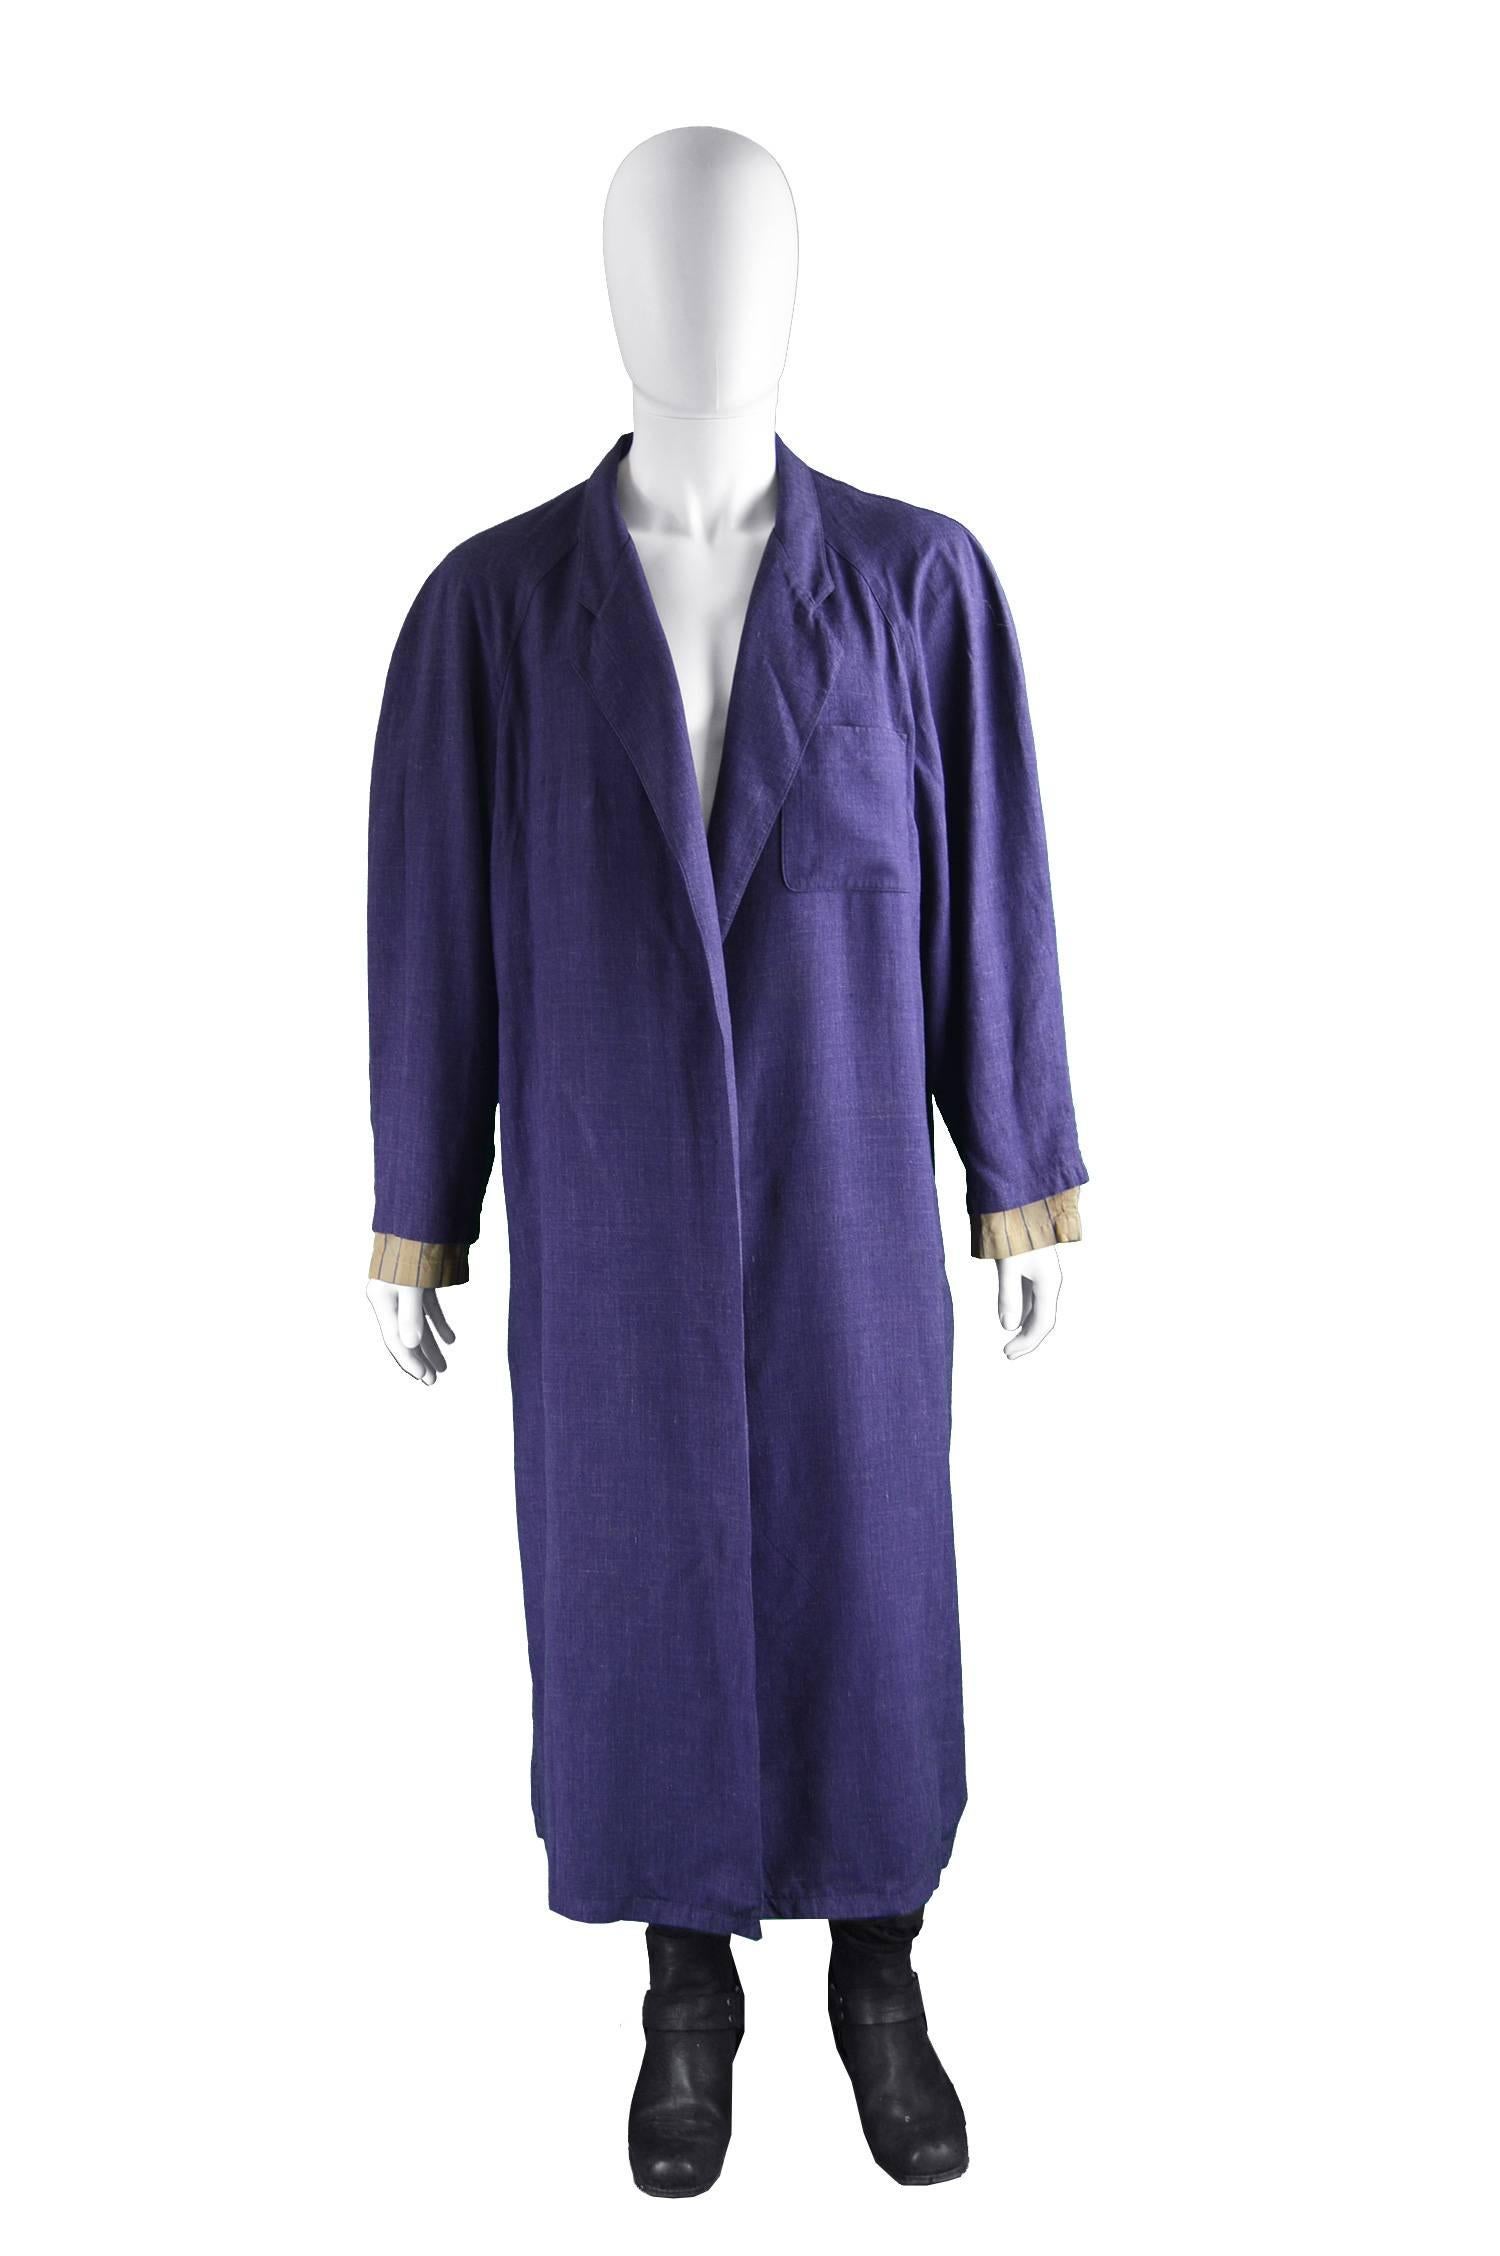 Jean Paul Gaultier Homme Pour Gibo Loose Purple Linen Coat, 1980s

Size: One Size fits Most, meant to have a loose fit. 
Chest - up to 48” / 122cm (has a loose, oversized fit and is meant to be worn open so chest size doesn’t really matter)
Length